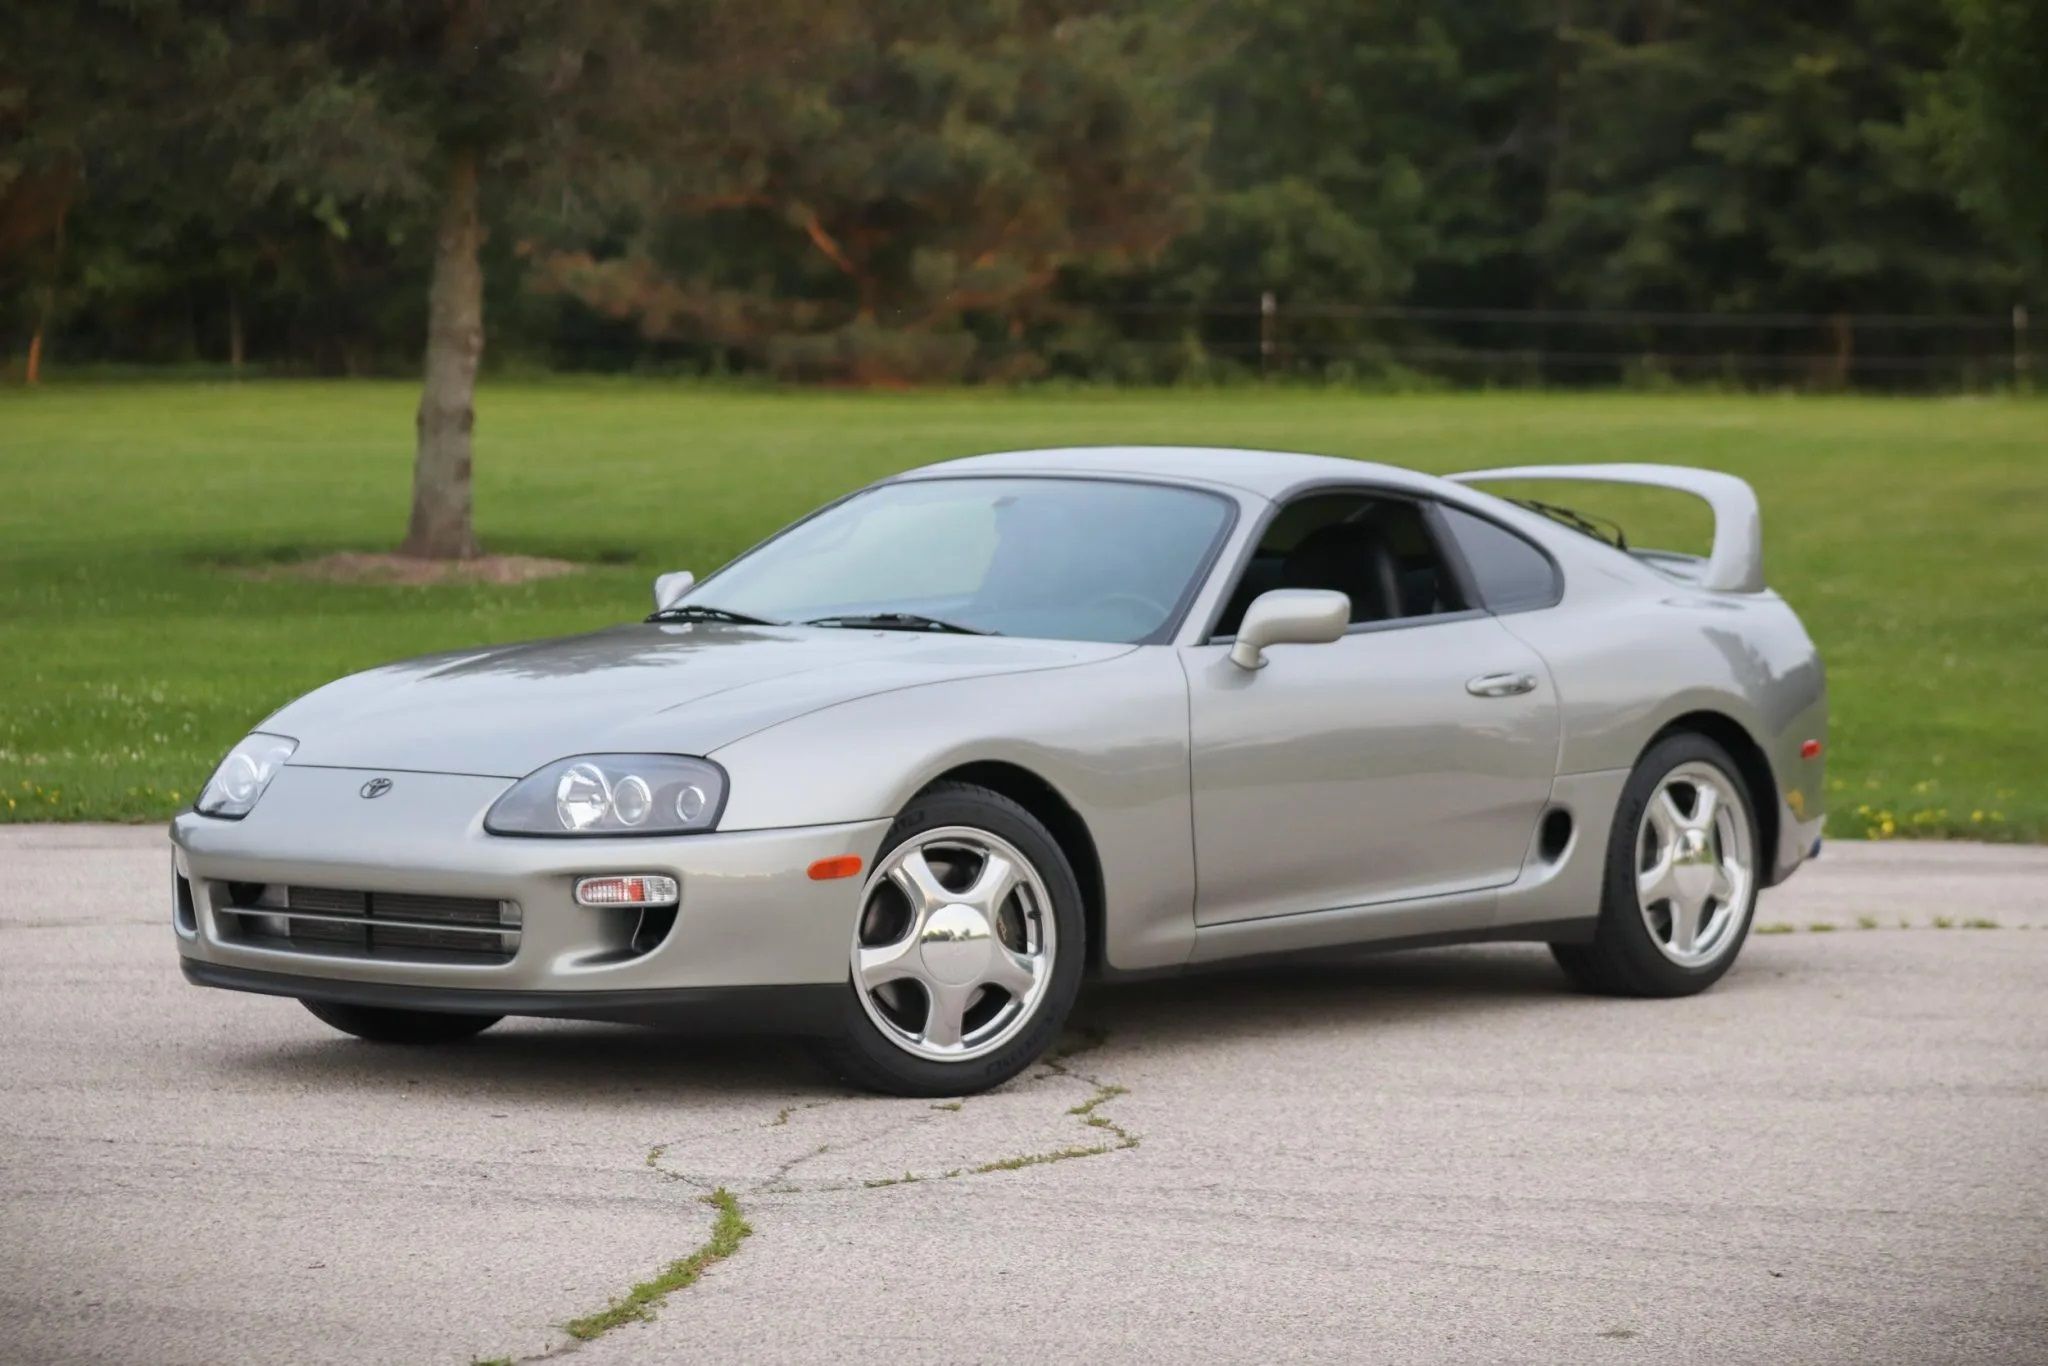 Despite Its Appearance, Not a Typical Mk4 Toyota Supra